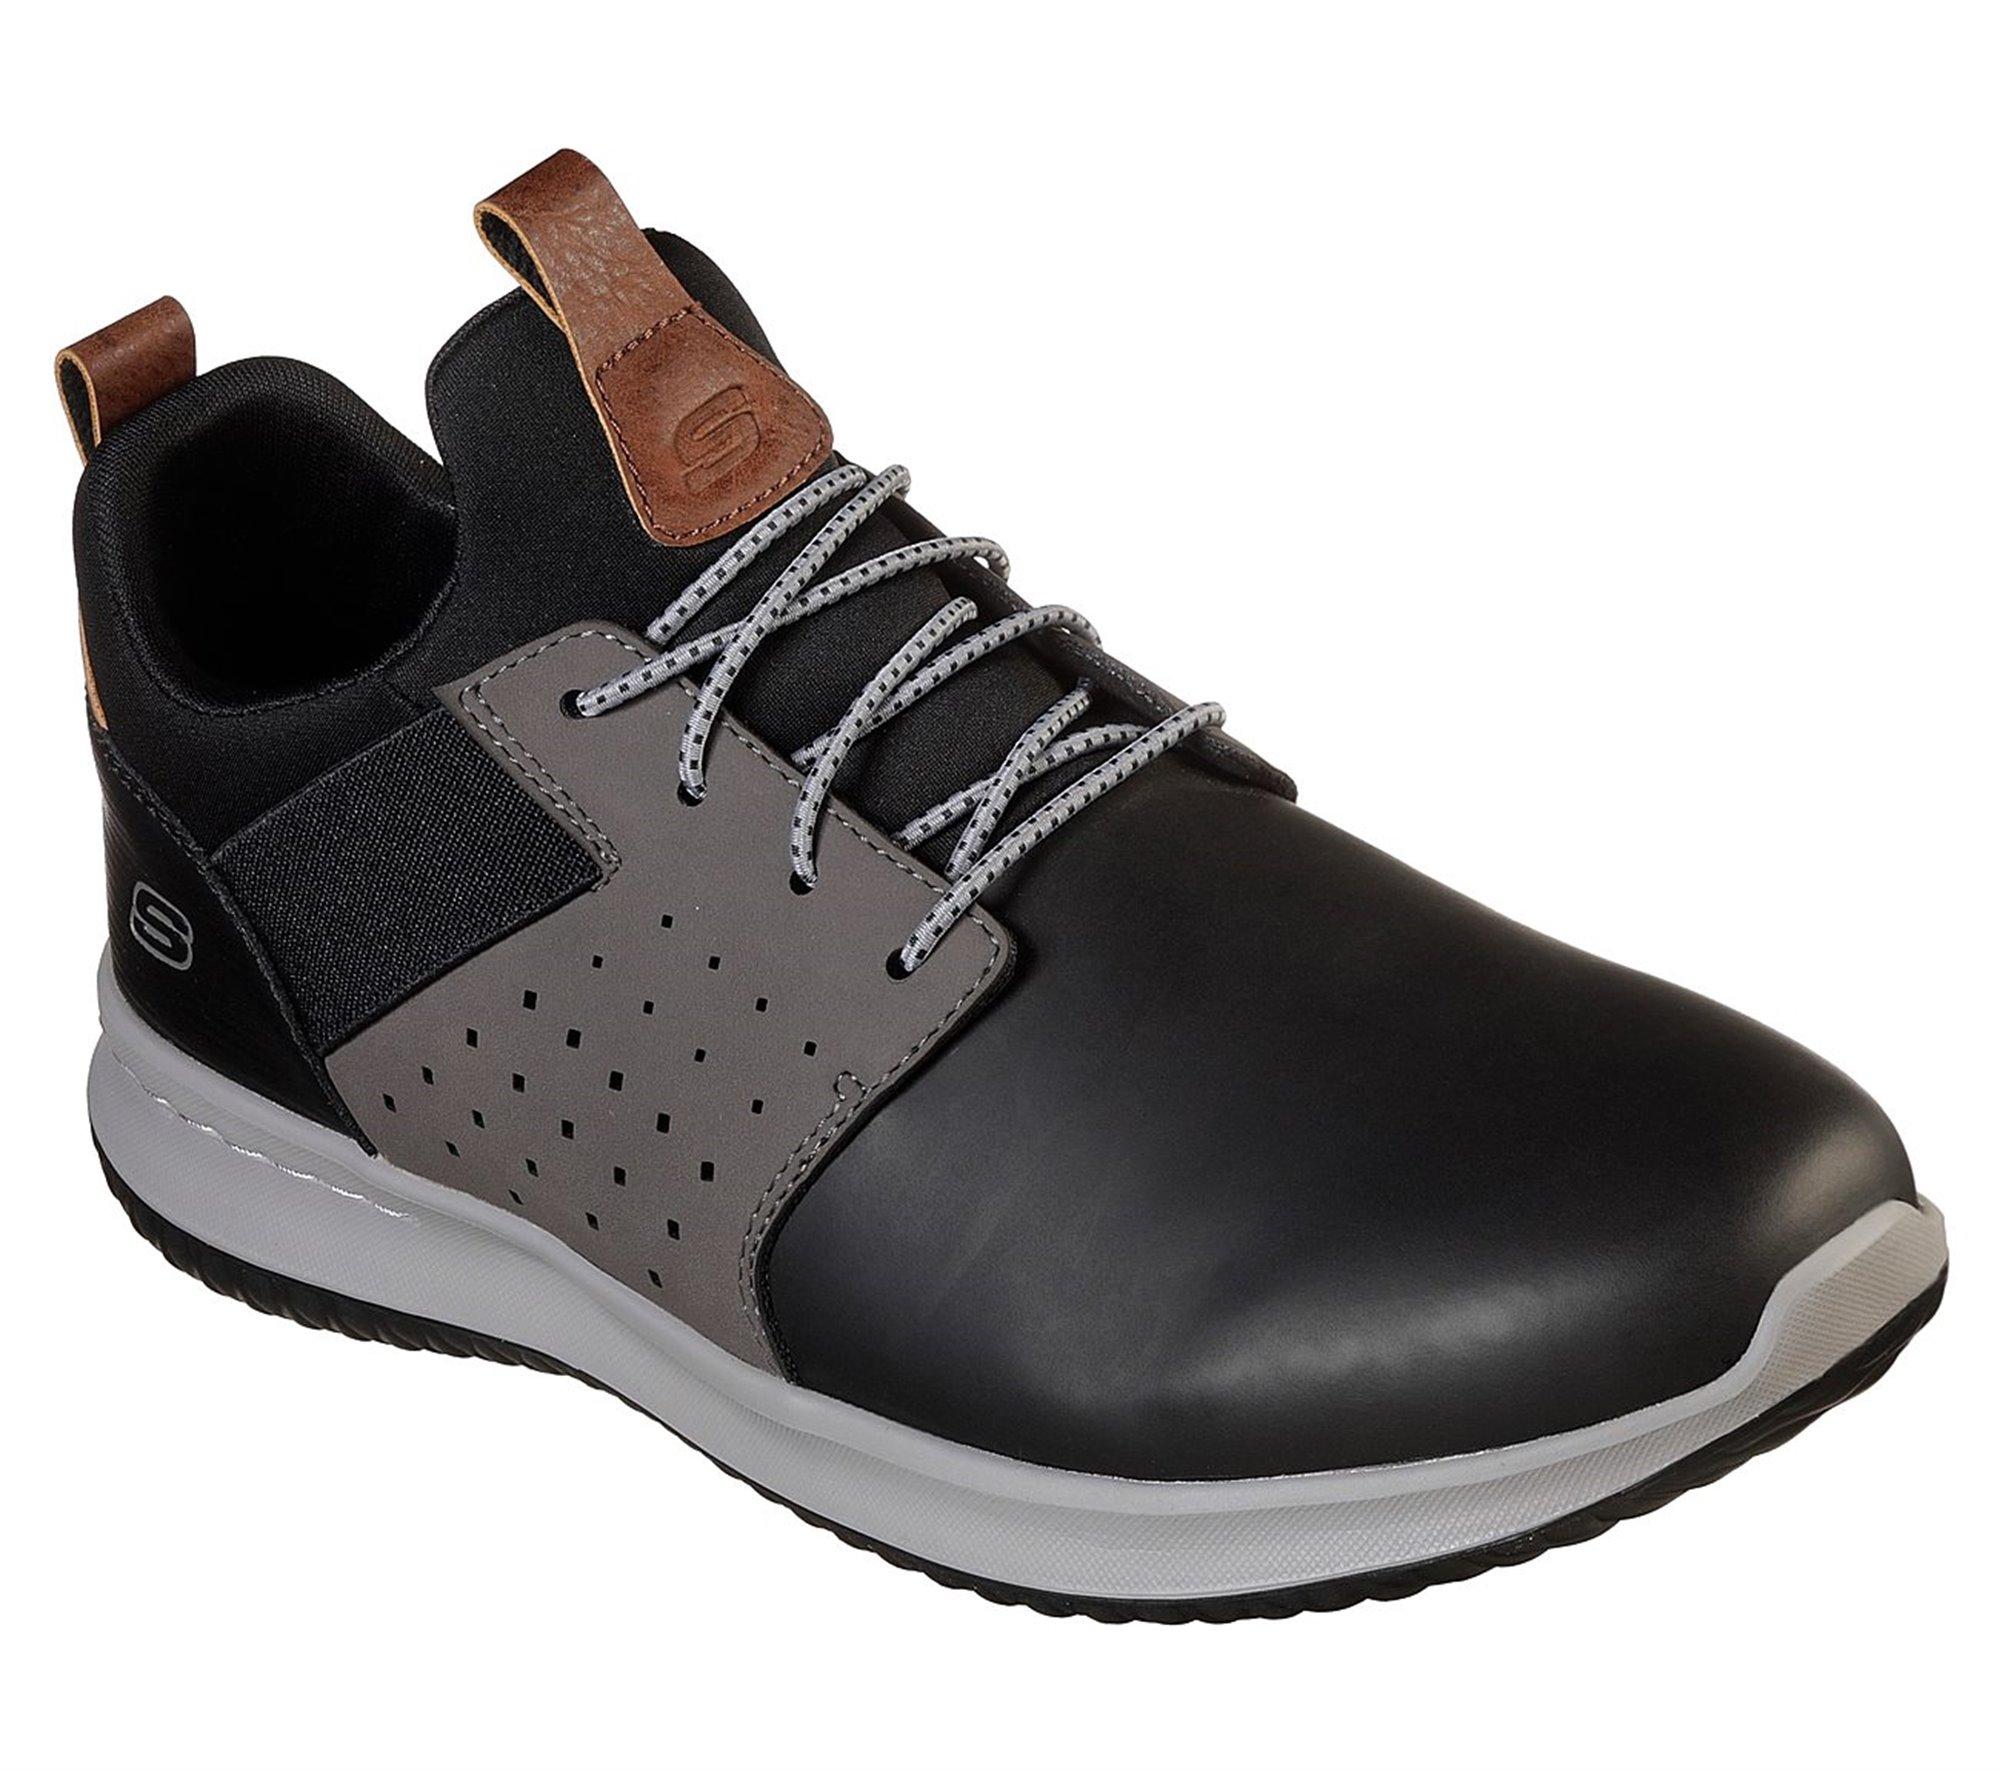 Skechers Leather Delson - Axton - Final Sale in Gray Black (Black) for Men  - Lyst